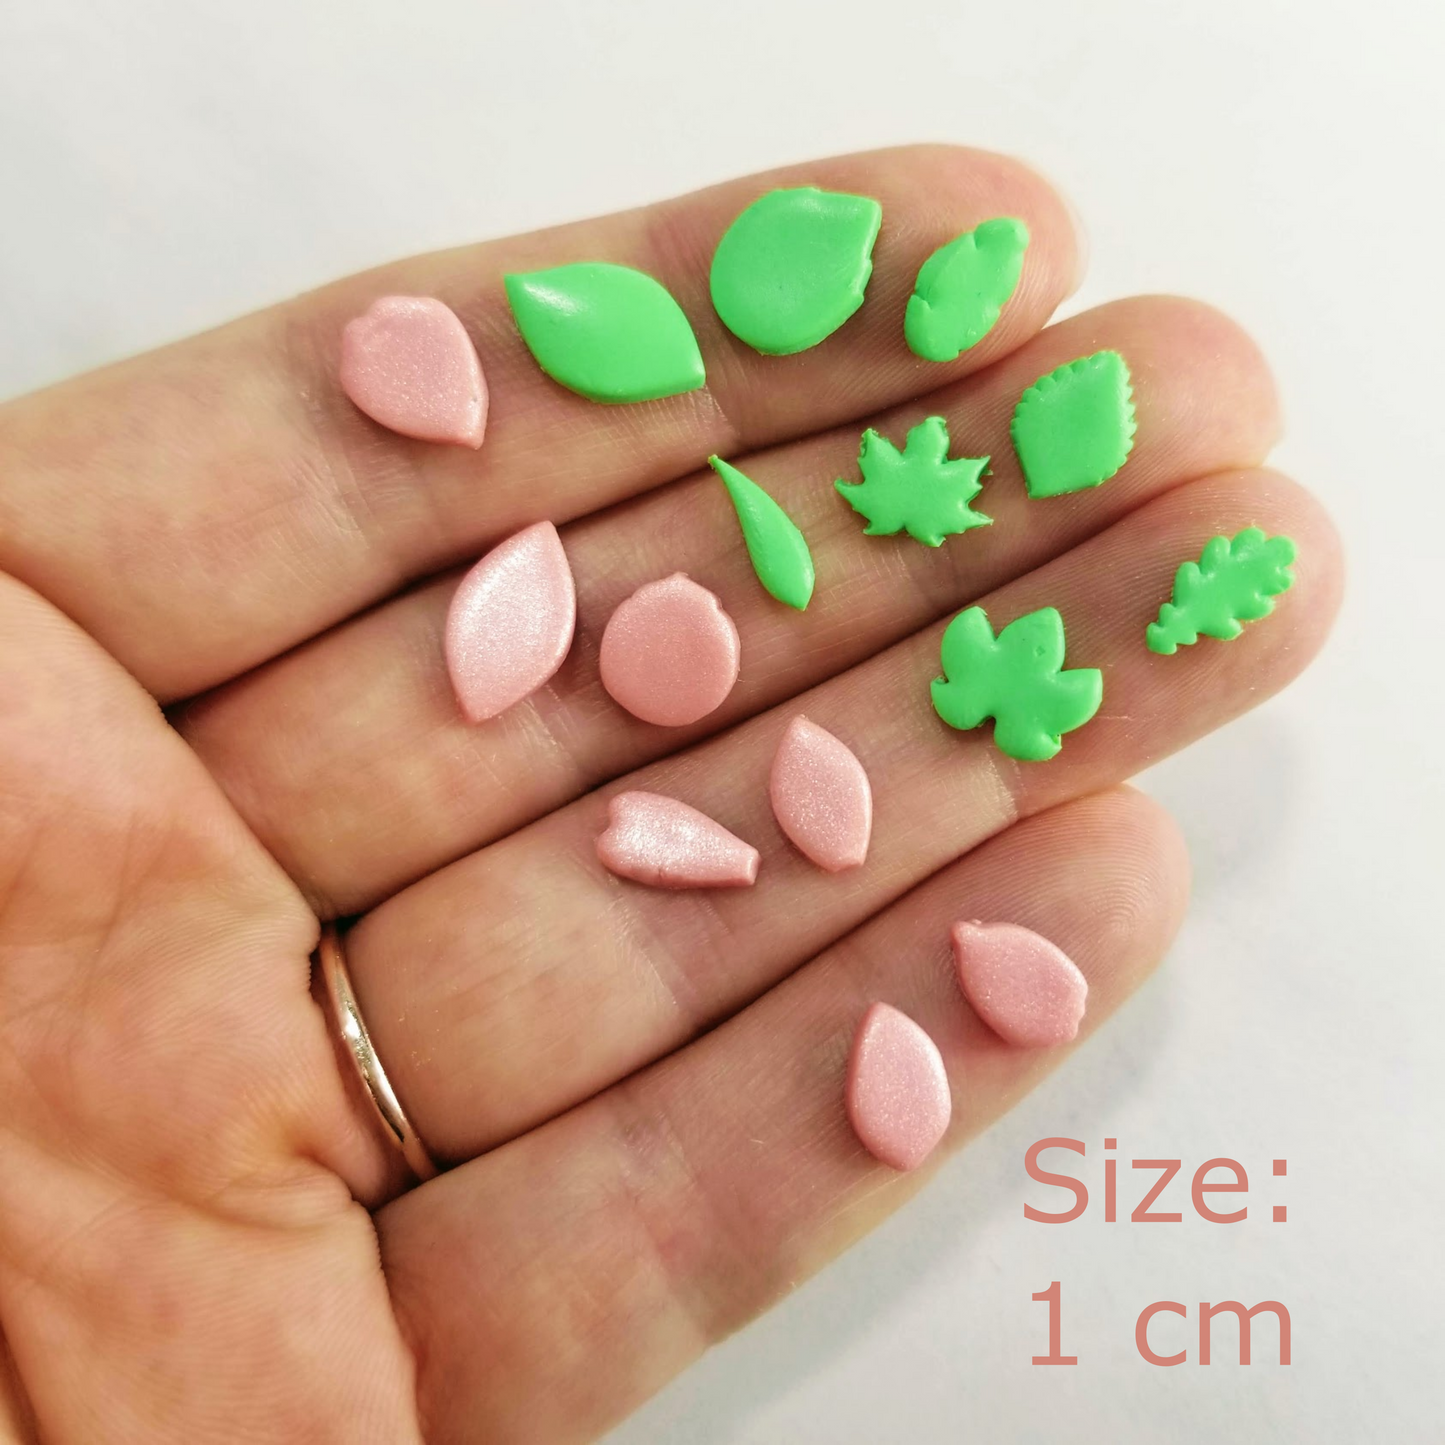 1 centimeter size Tiny leaves and flower petals set sample finish product for reference